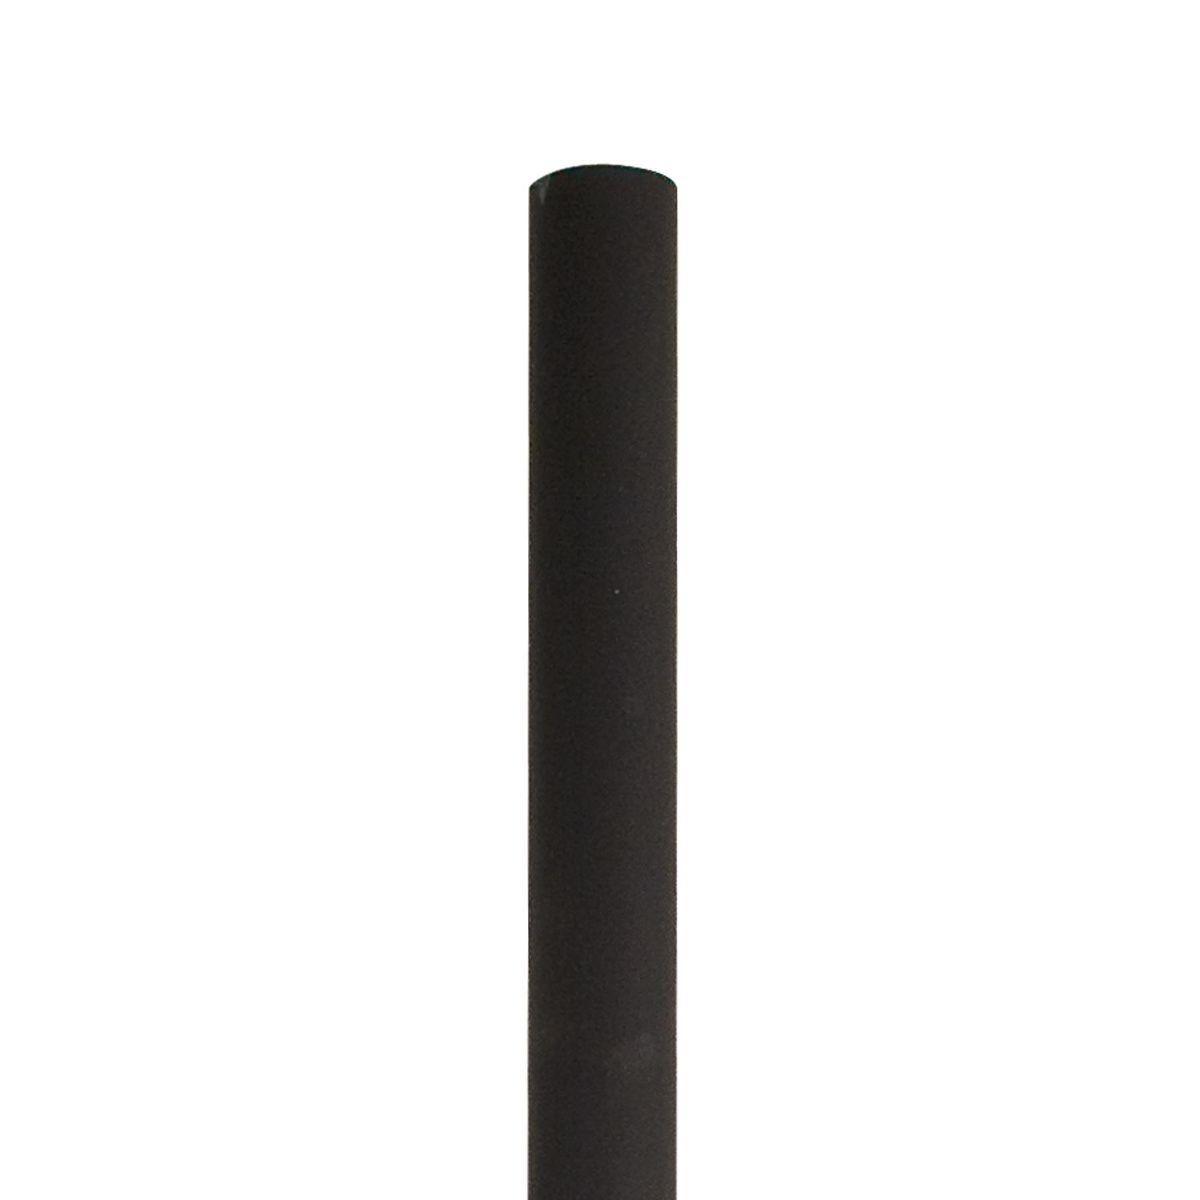 8 ft Round Aluminum Direct Burial Pole 3 In. Shaft Black Finish - Bees Lighting